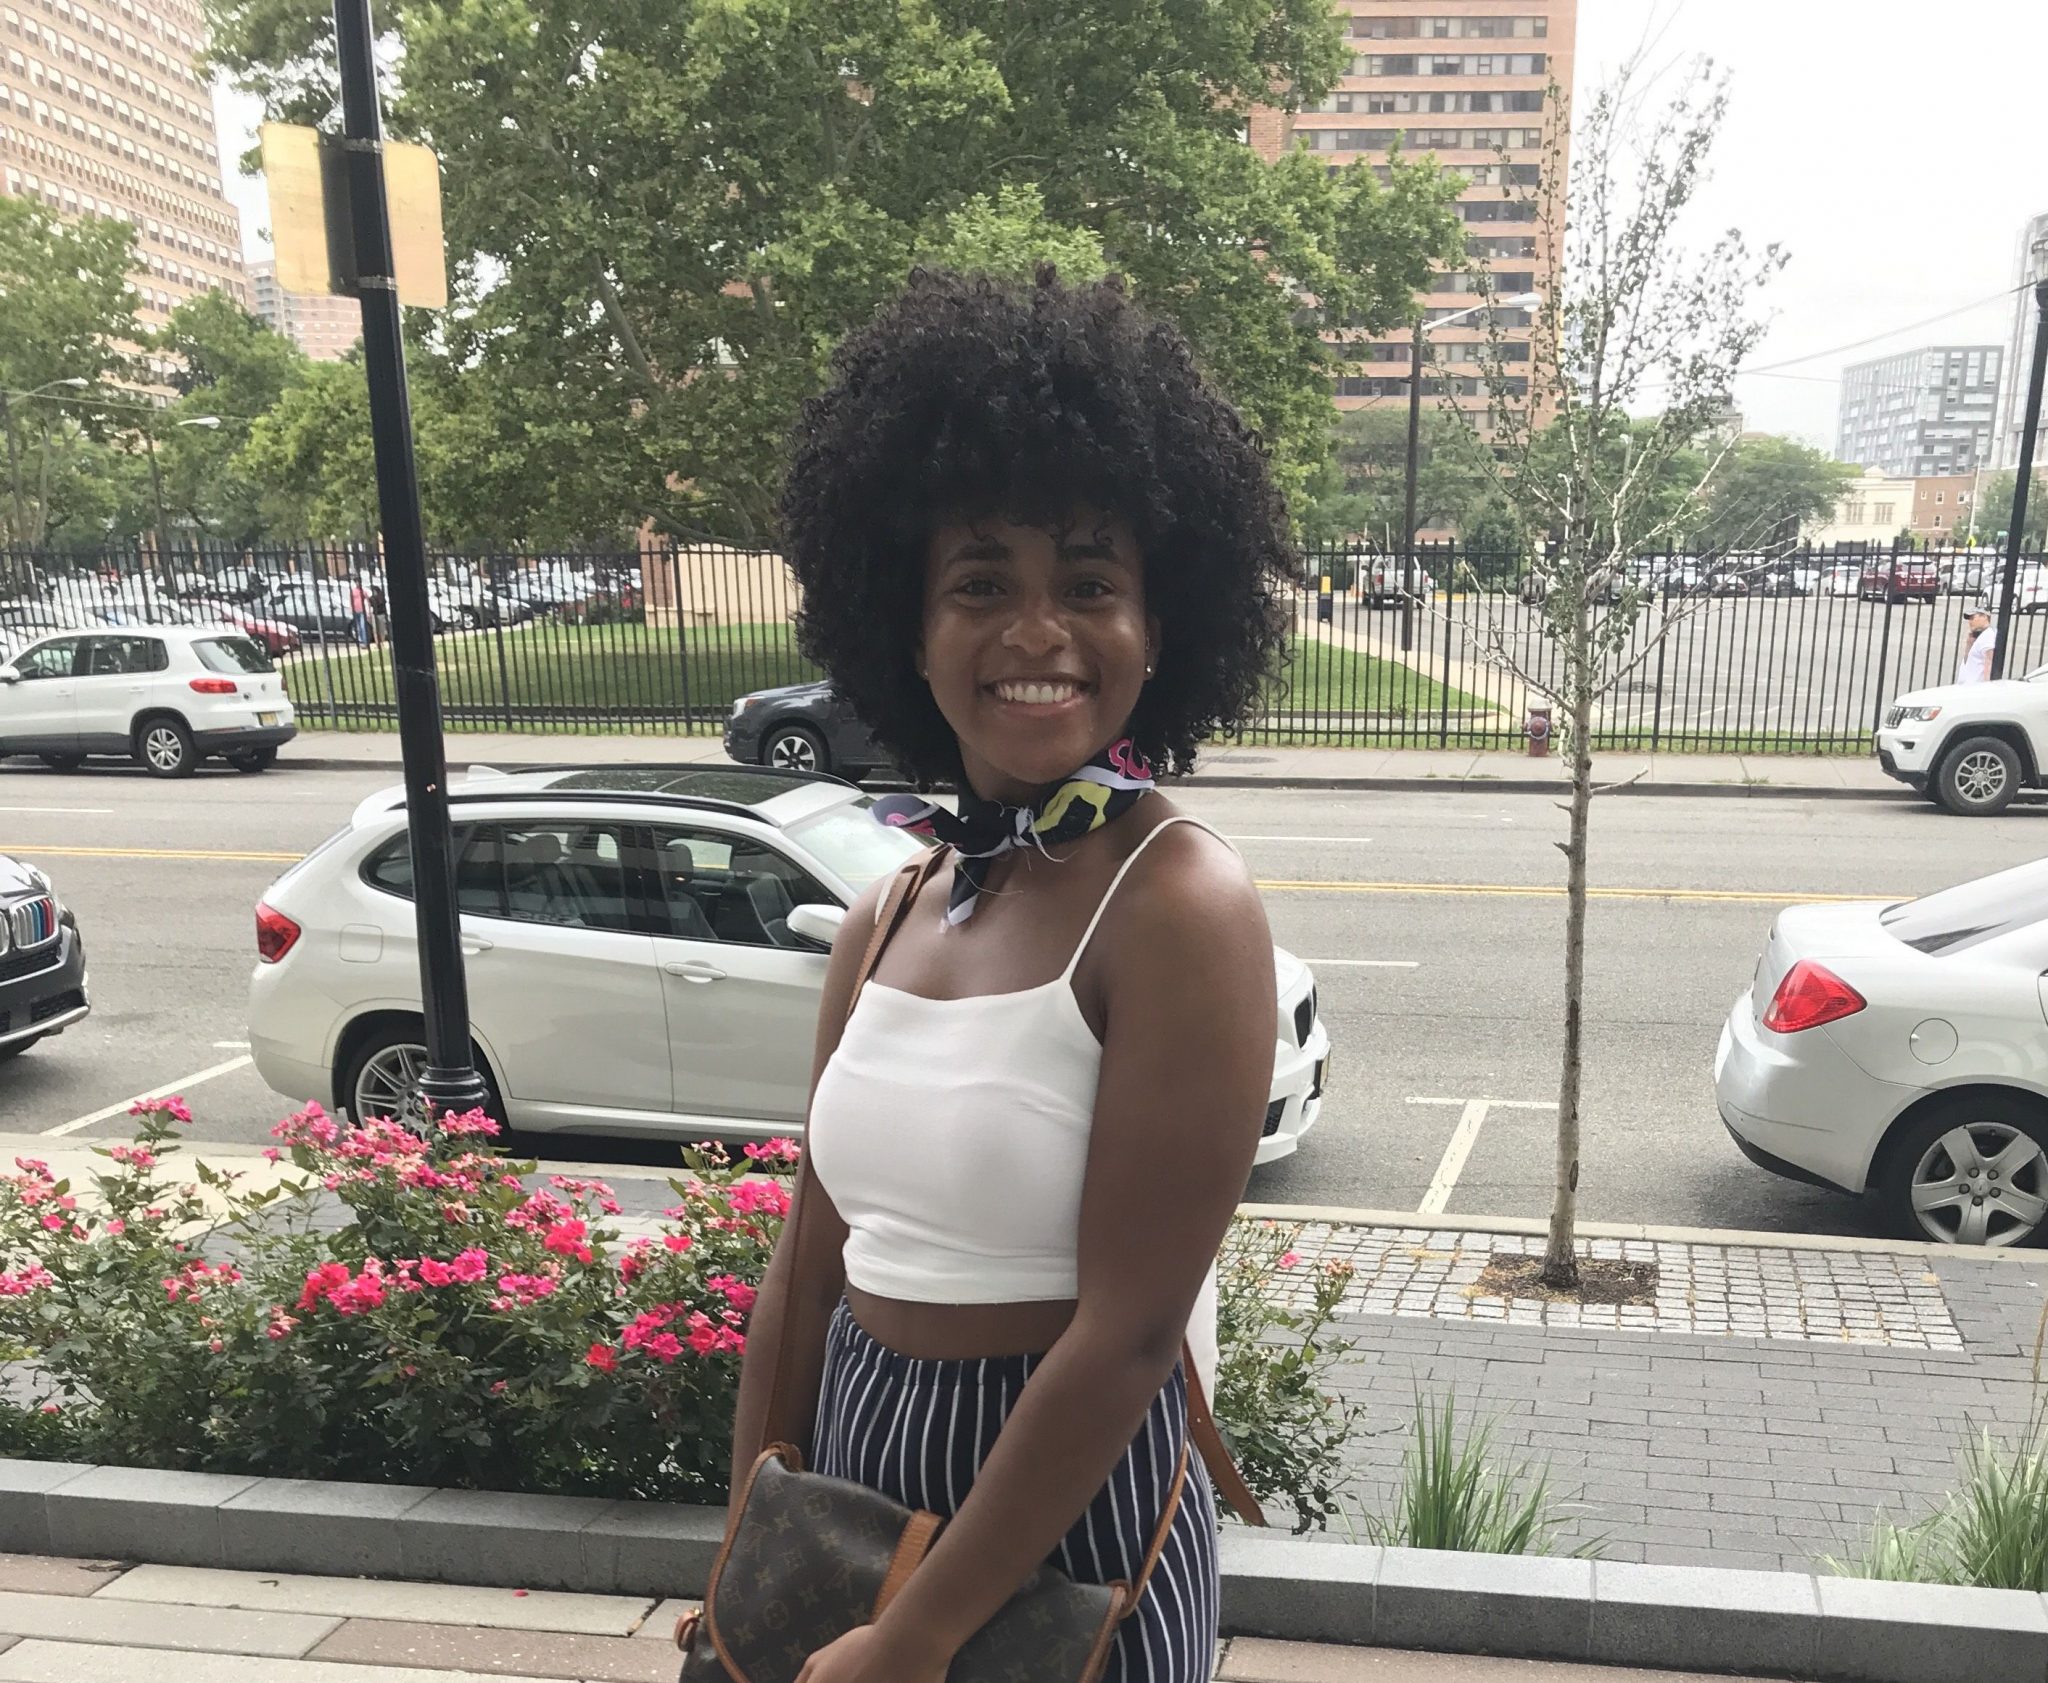 how 8 women learned to love their natural hair in college